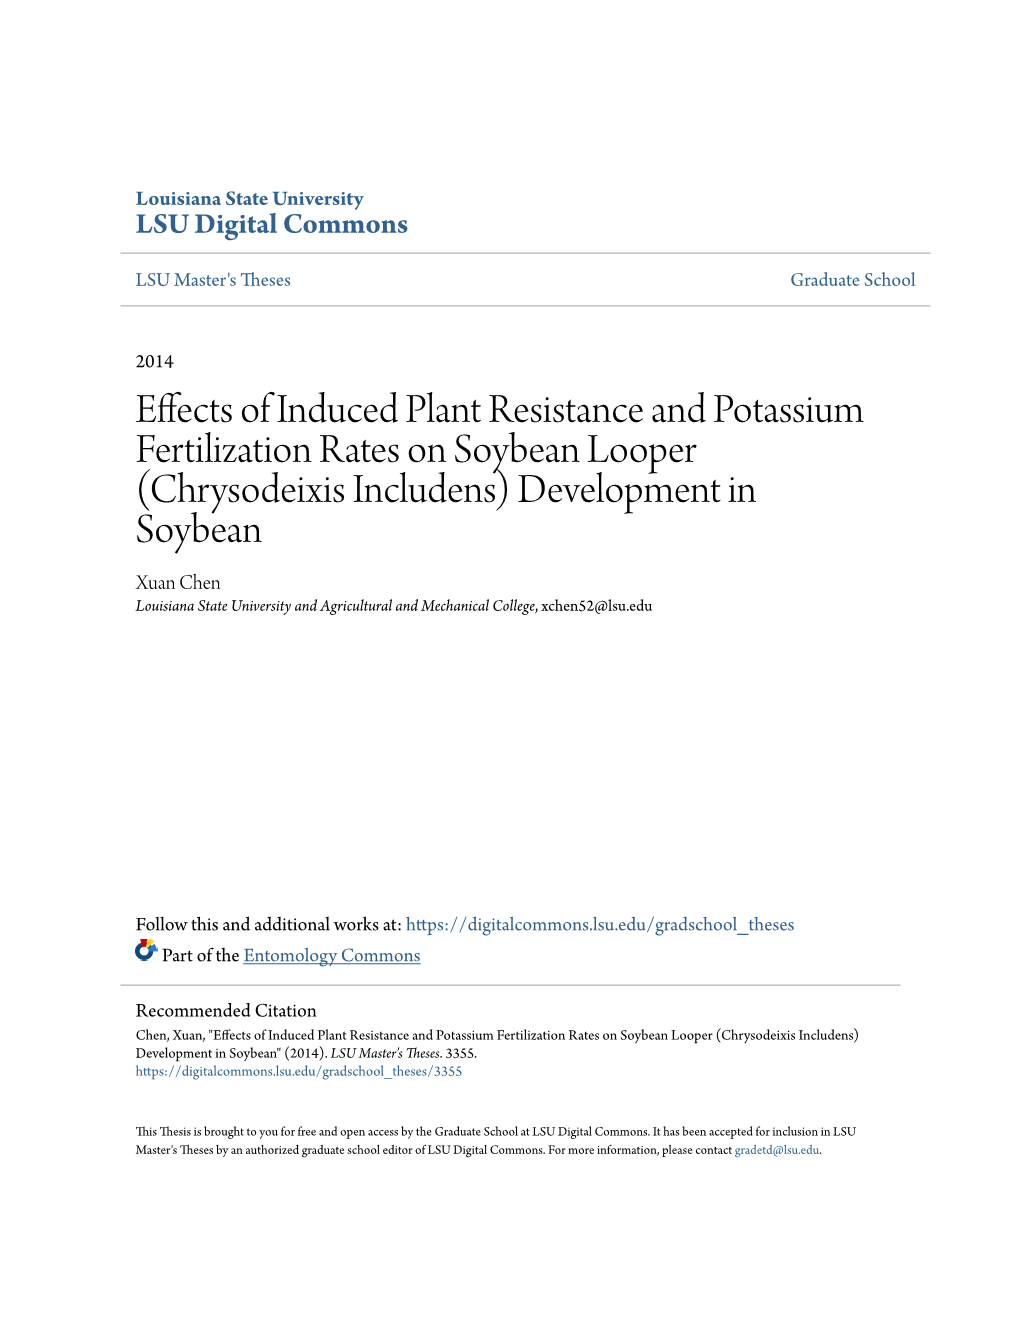 Effects of Induced Plant Resistance And